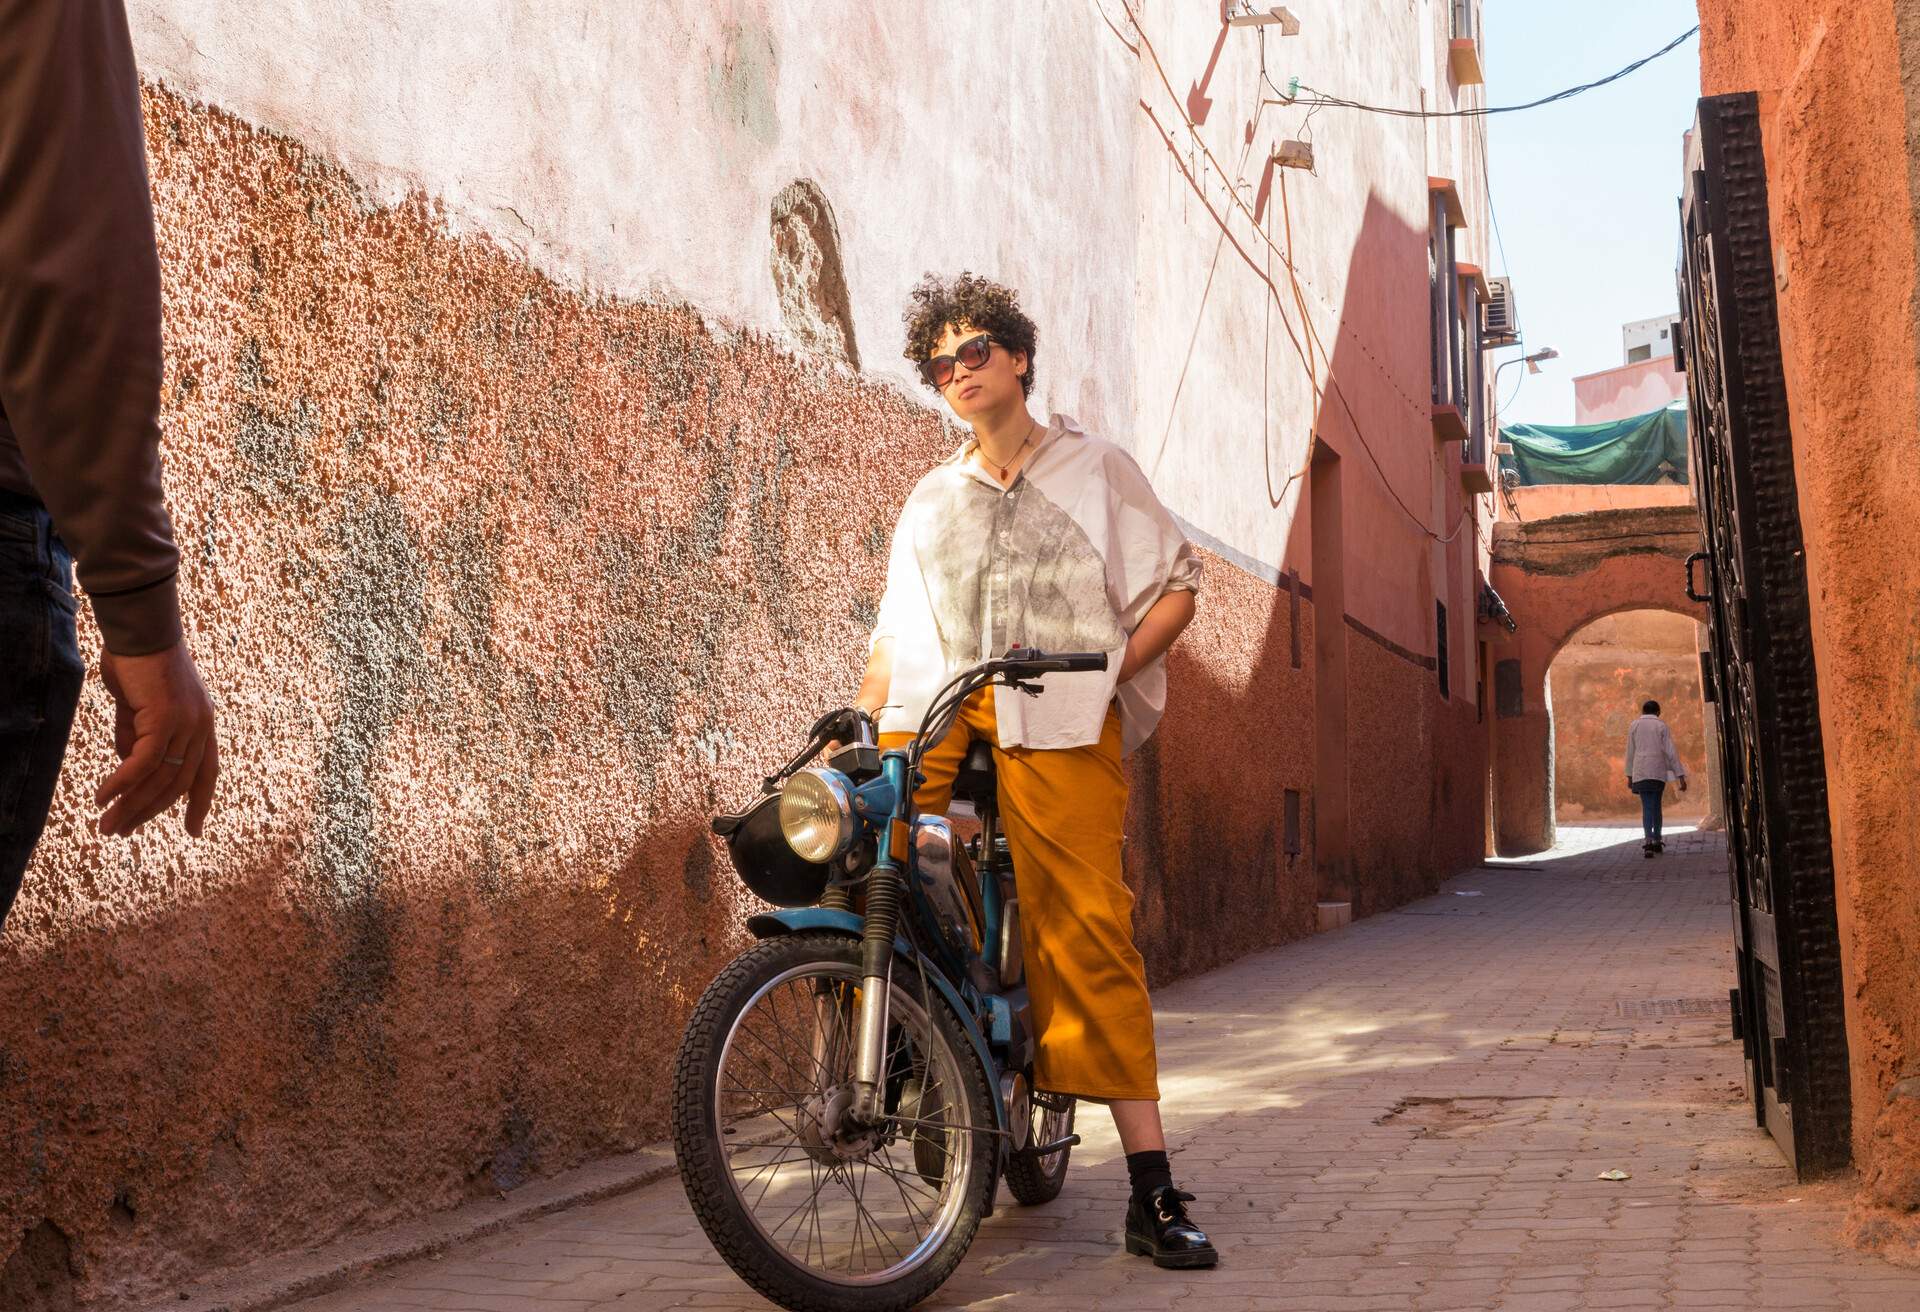 DEST_MOROCCO_MARRAKESH_THEME_MOPED_PEOPLE_WOMAN_GettyImages-1081003628